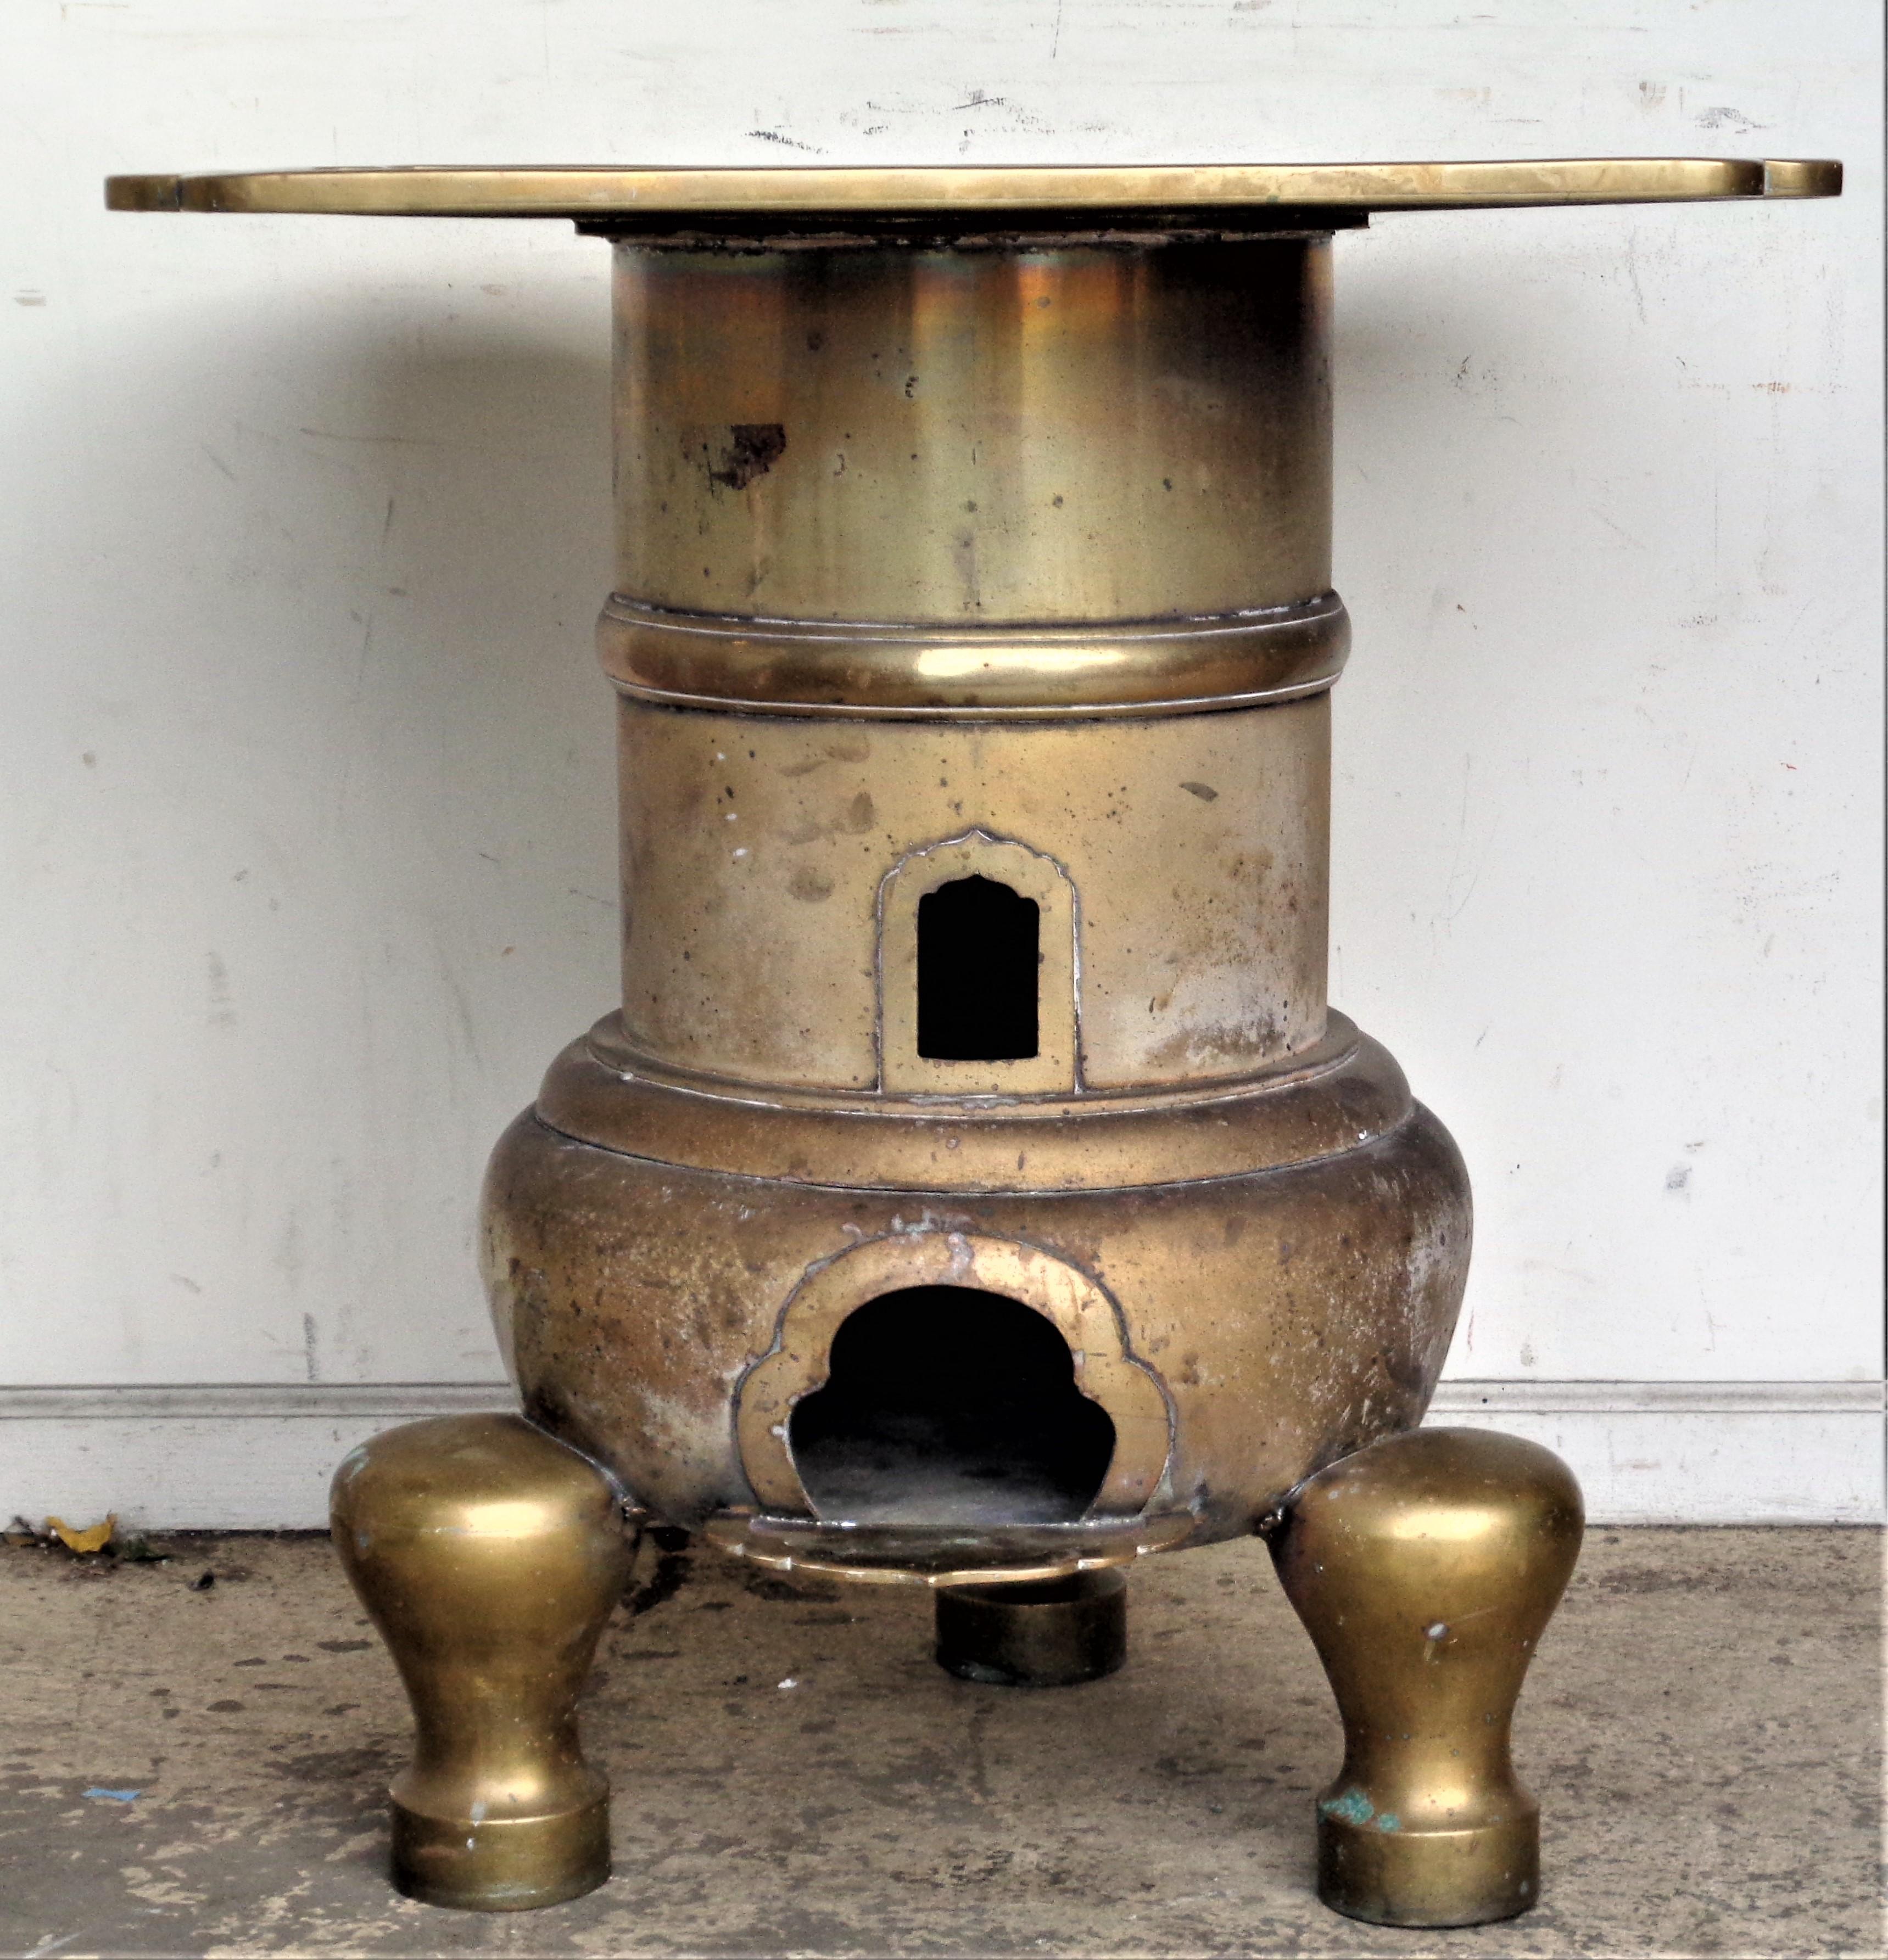 Antique Japanese large architectural pagoda form bronze kiln furnace for melting metal w/ the original ceramic insert ( signed at two places at top of insert in Japanese writing ) An incredibly beautiful and rare object ... for utilitarian or 